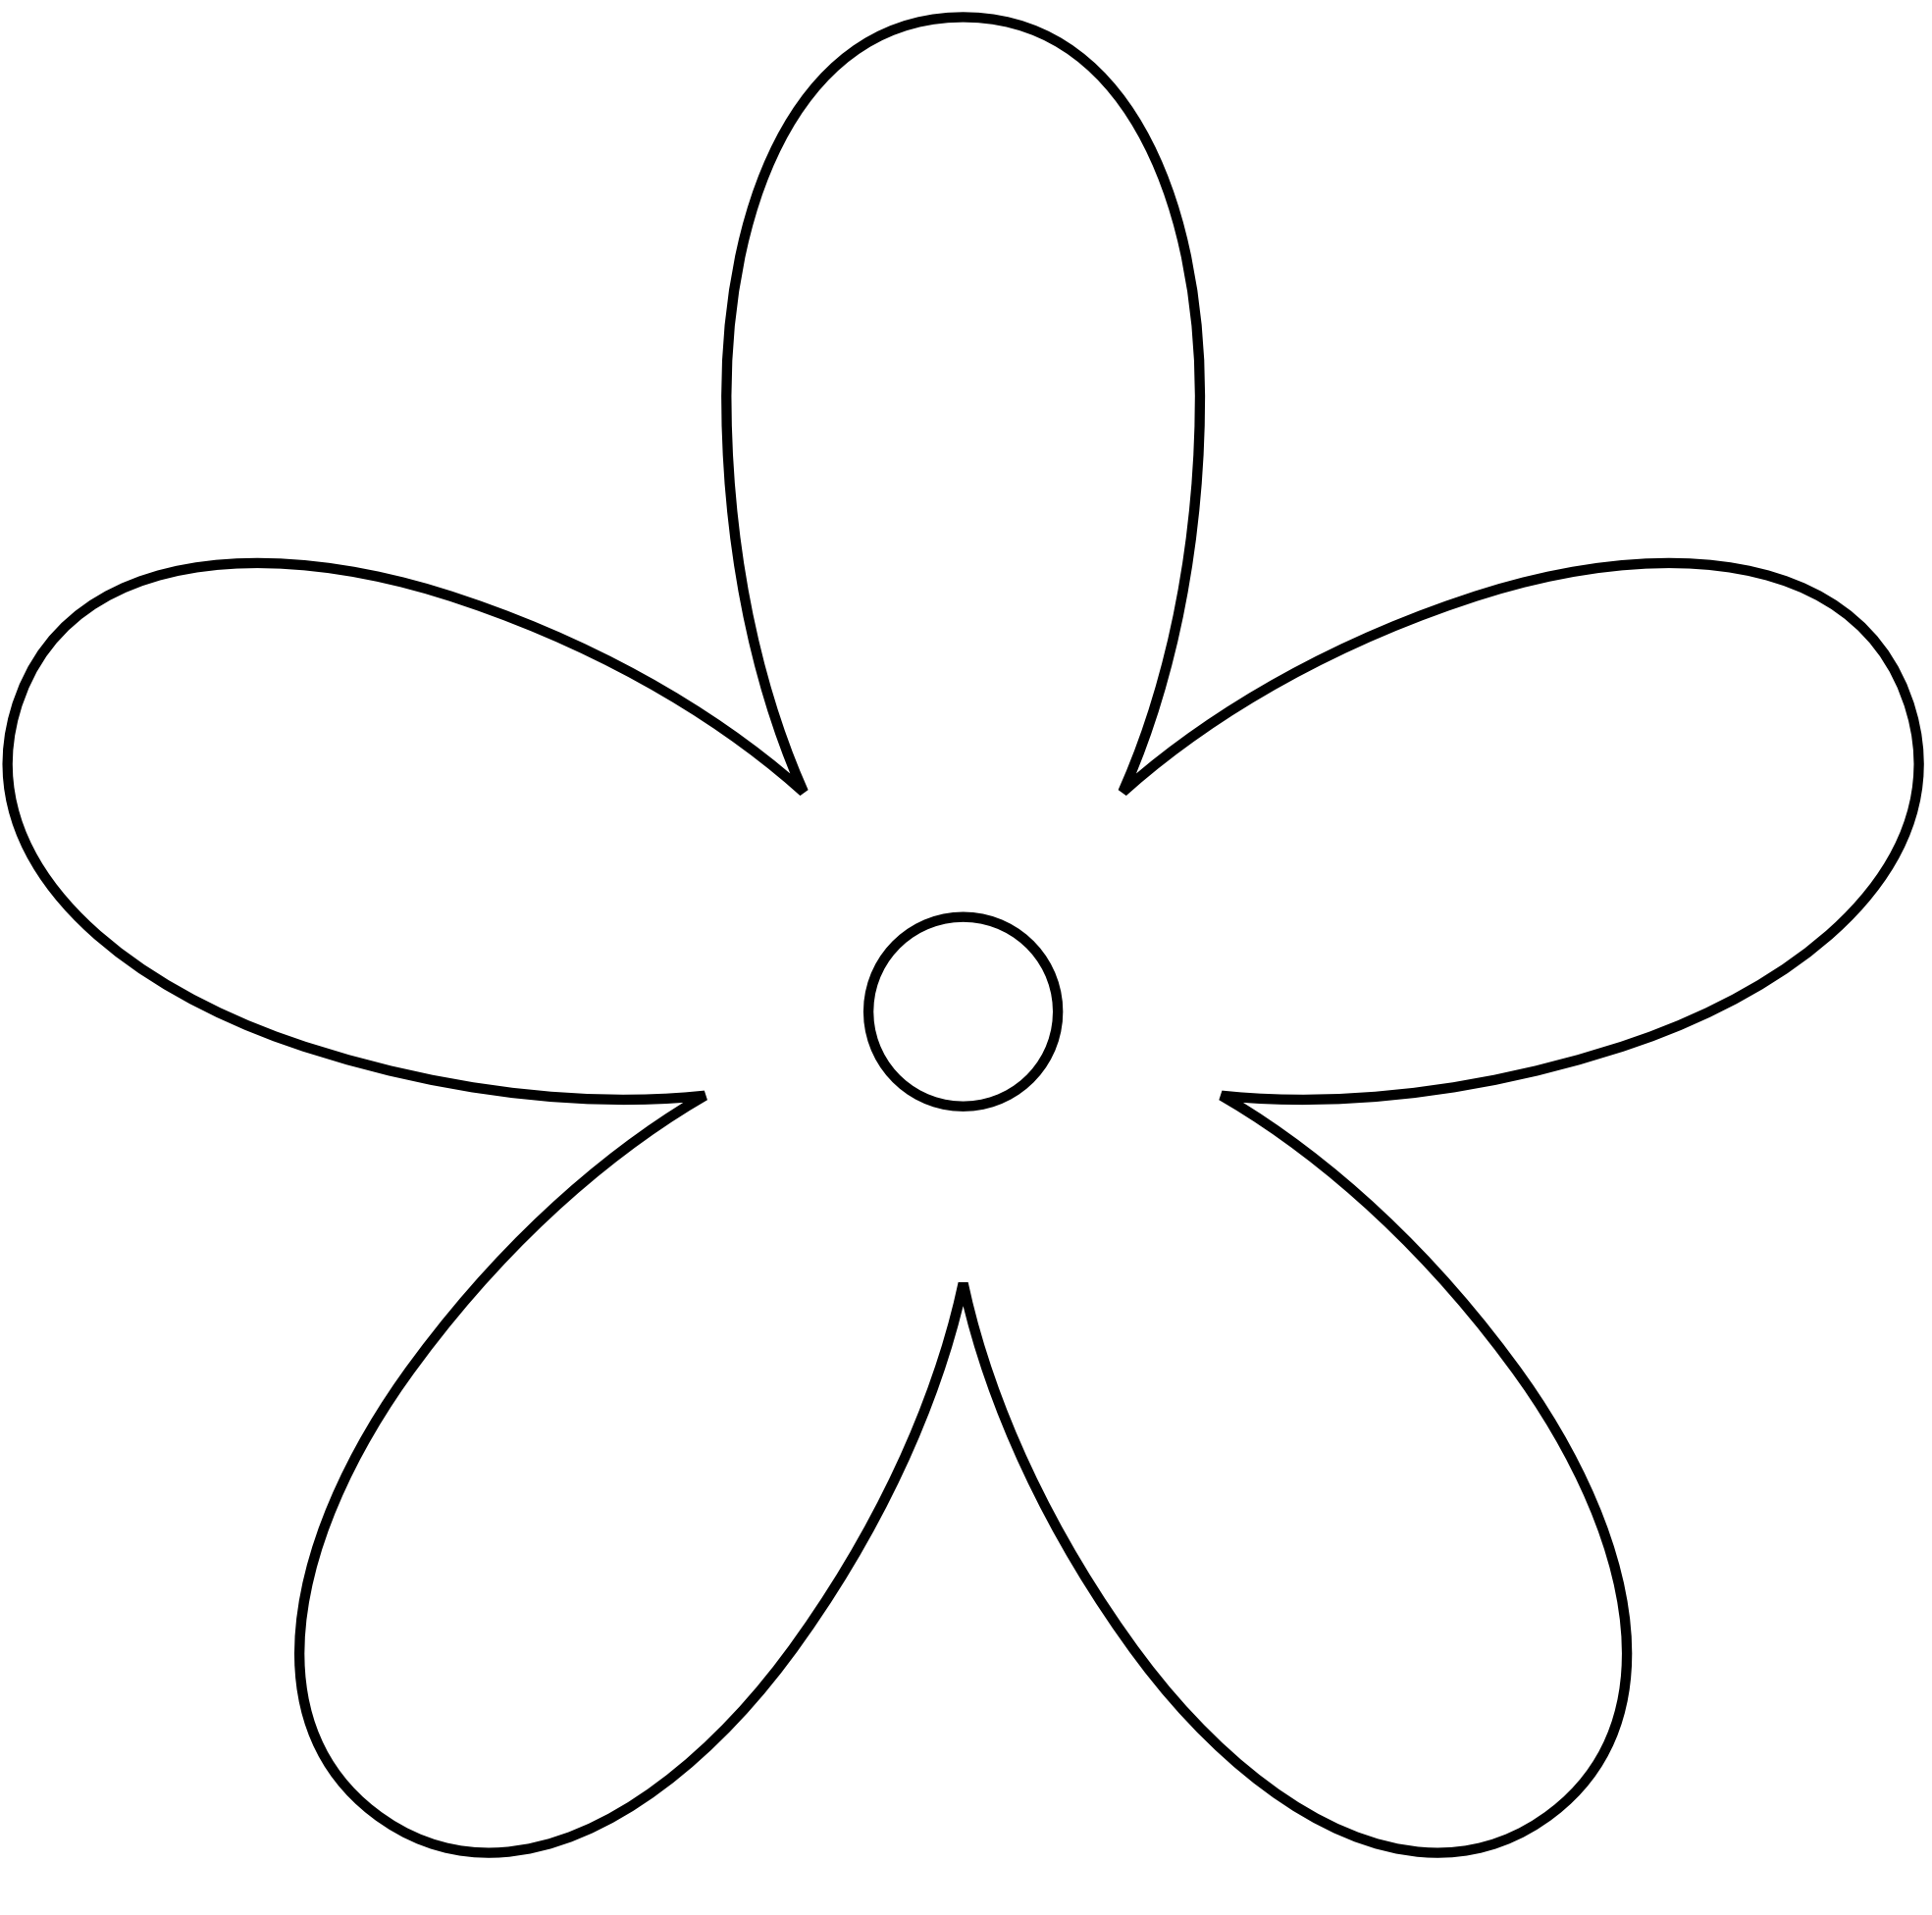 Free Black And White Flower Pics, Download Free Clip Art.